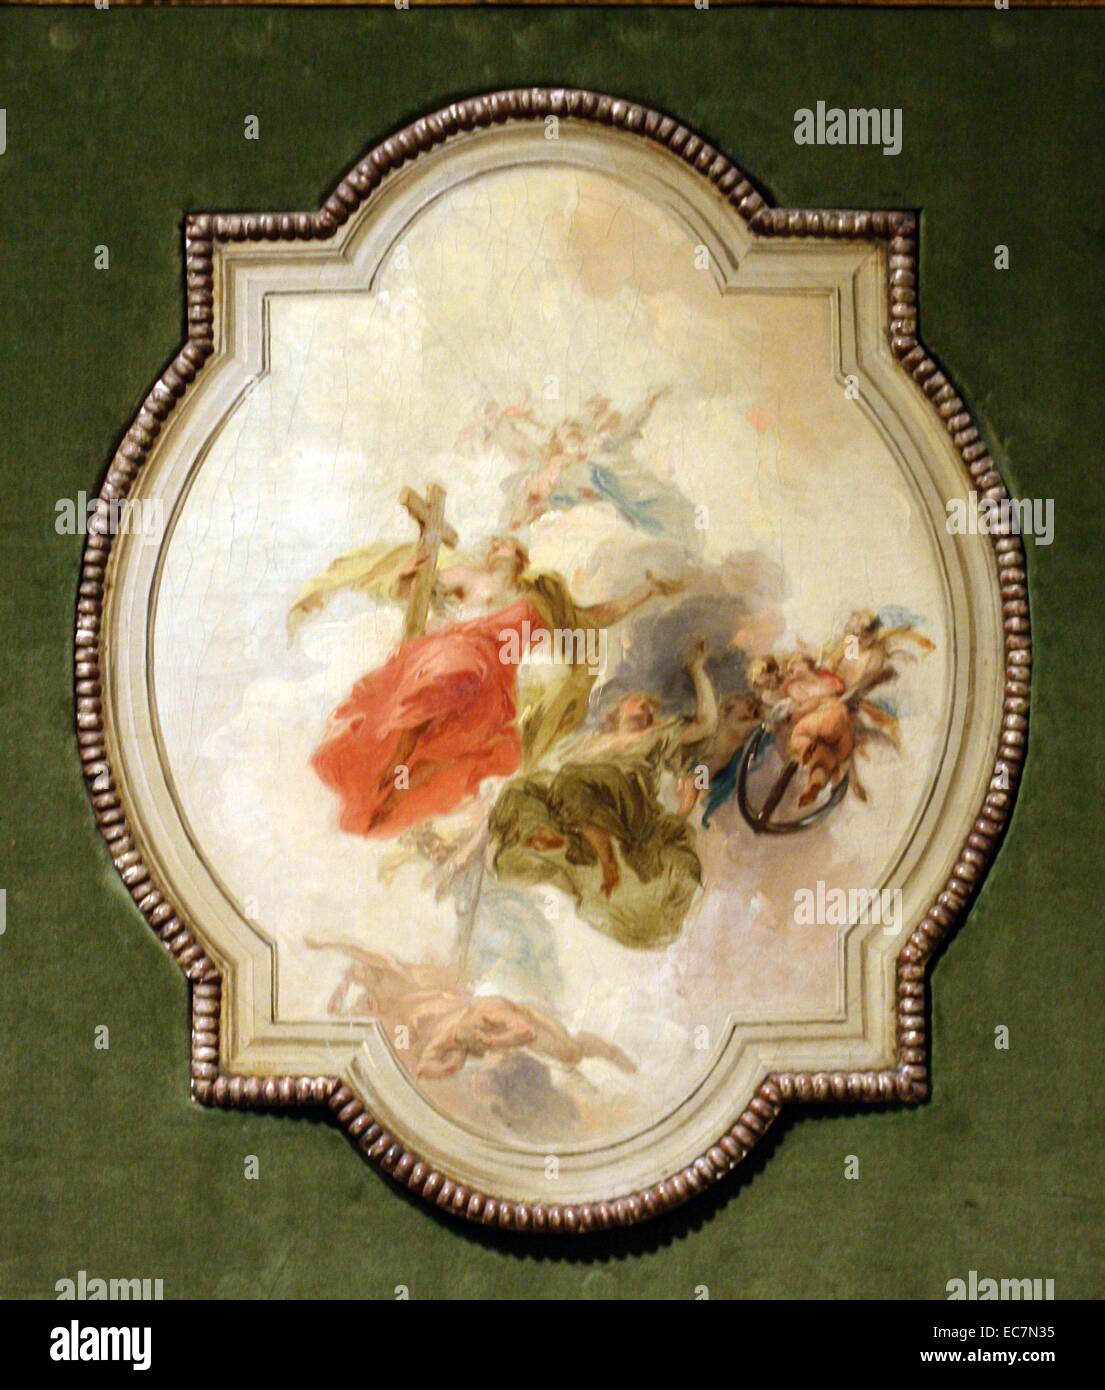 Jacob de Wit (1695-1754) Triumph of the Three Christian Virtues oil on panel.  De Wit worked as a decorative painter in Amsterdam from about 1715 until his death.  He was much in demand as a painter of ceilings and as a skilful painter of trompe l'oeil reliefs. Stock Photo